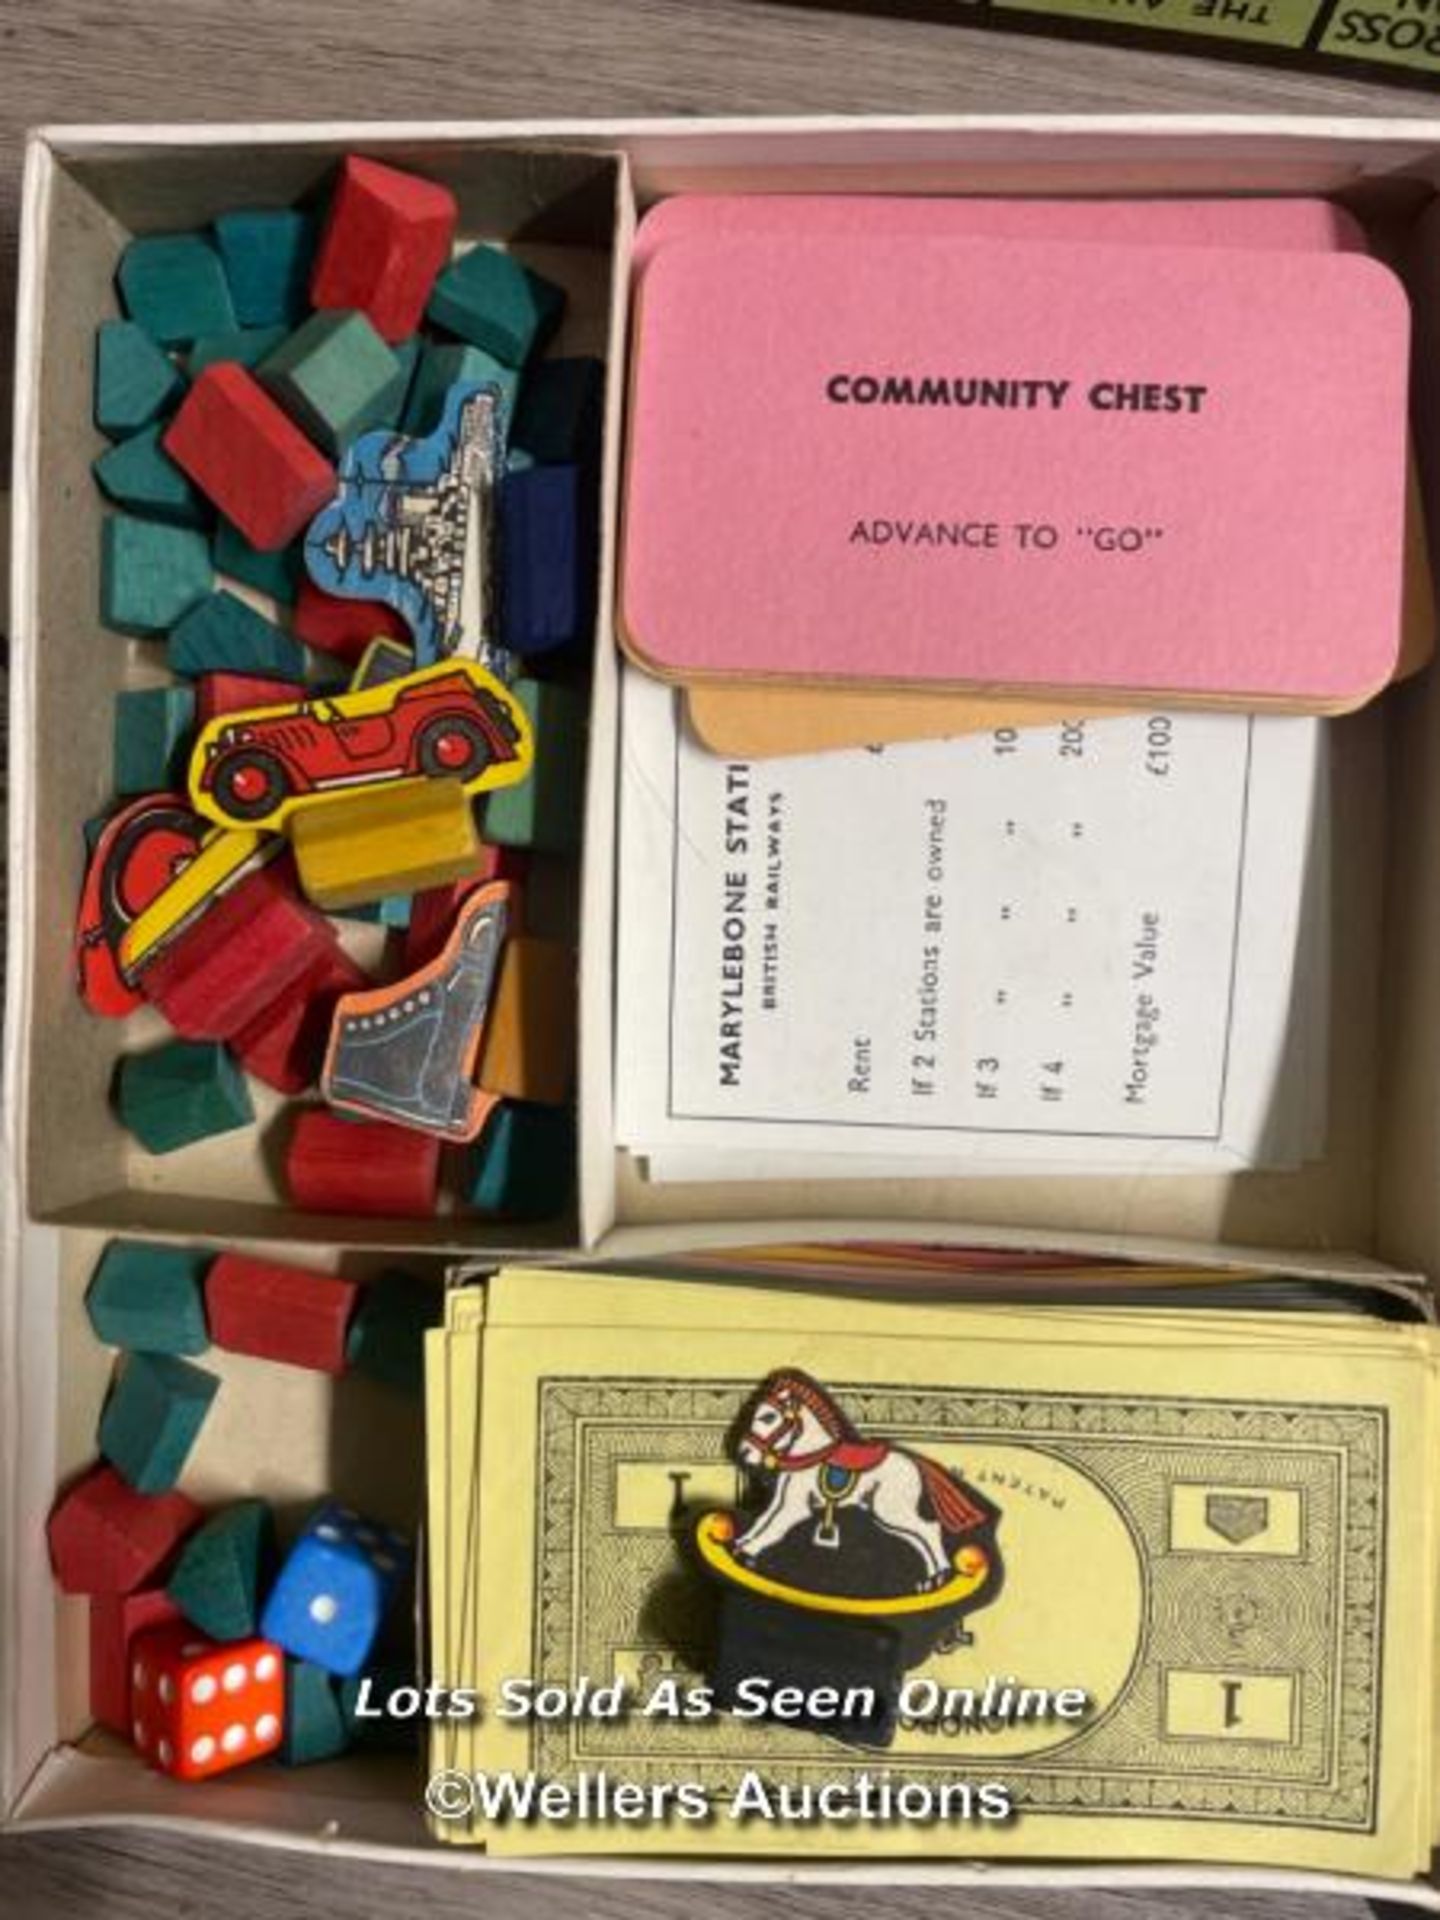 MONOPOLY SET INCLUDING BOARD - Image 2 of 3